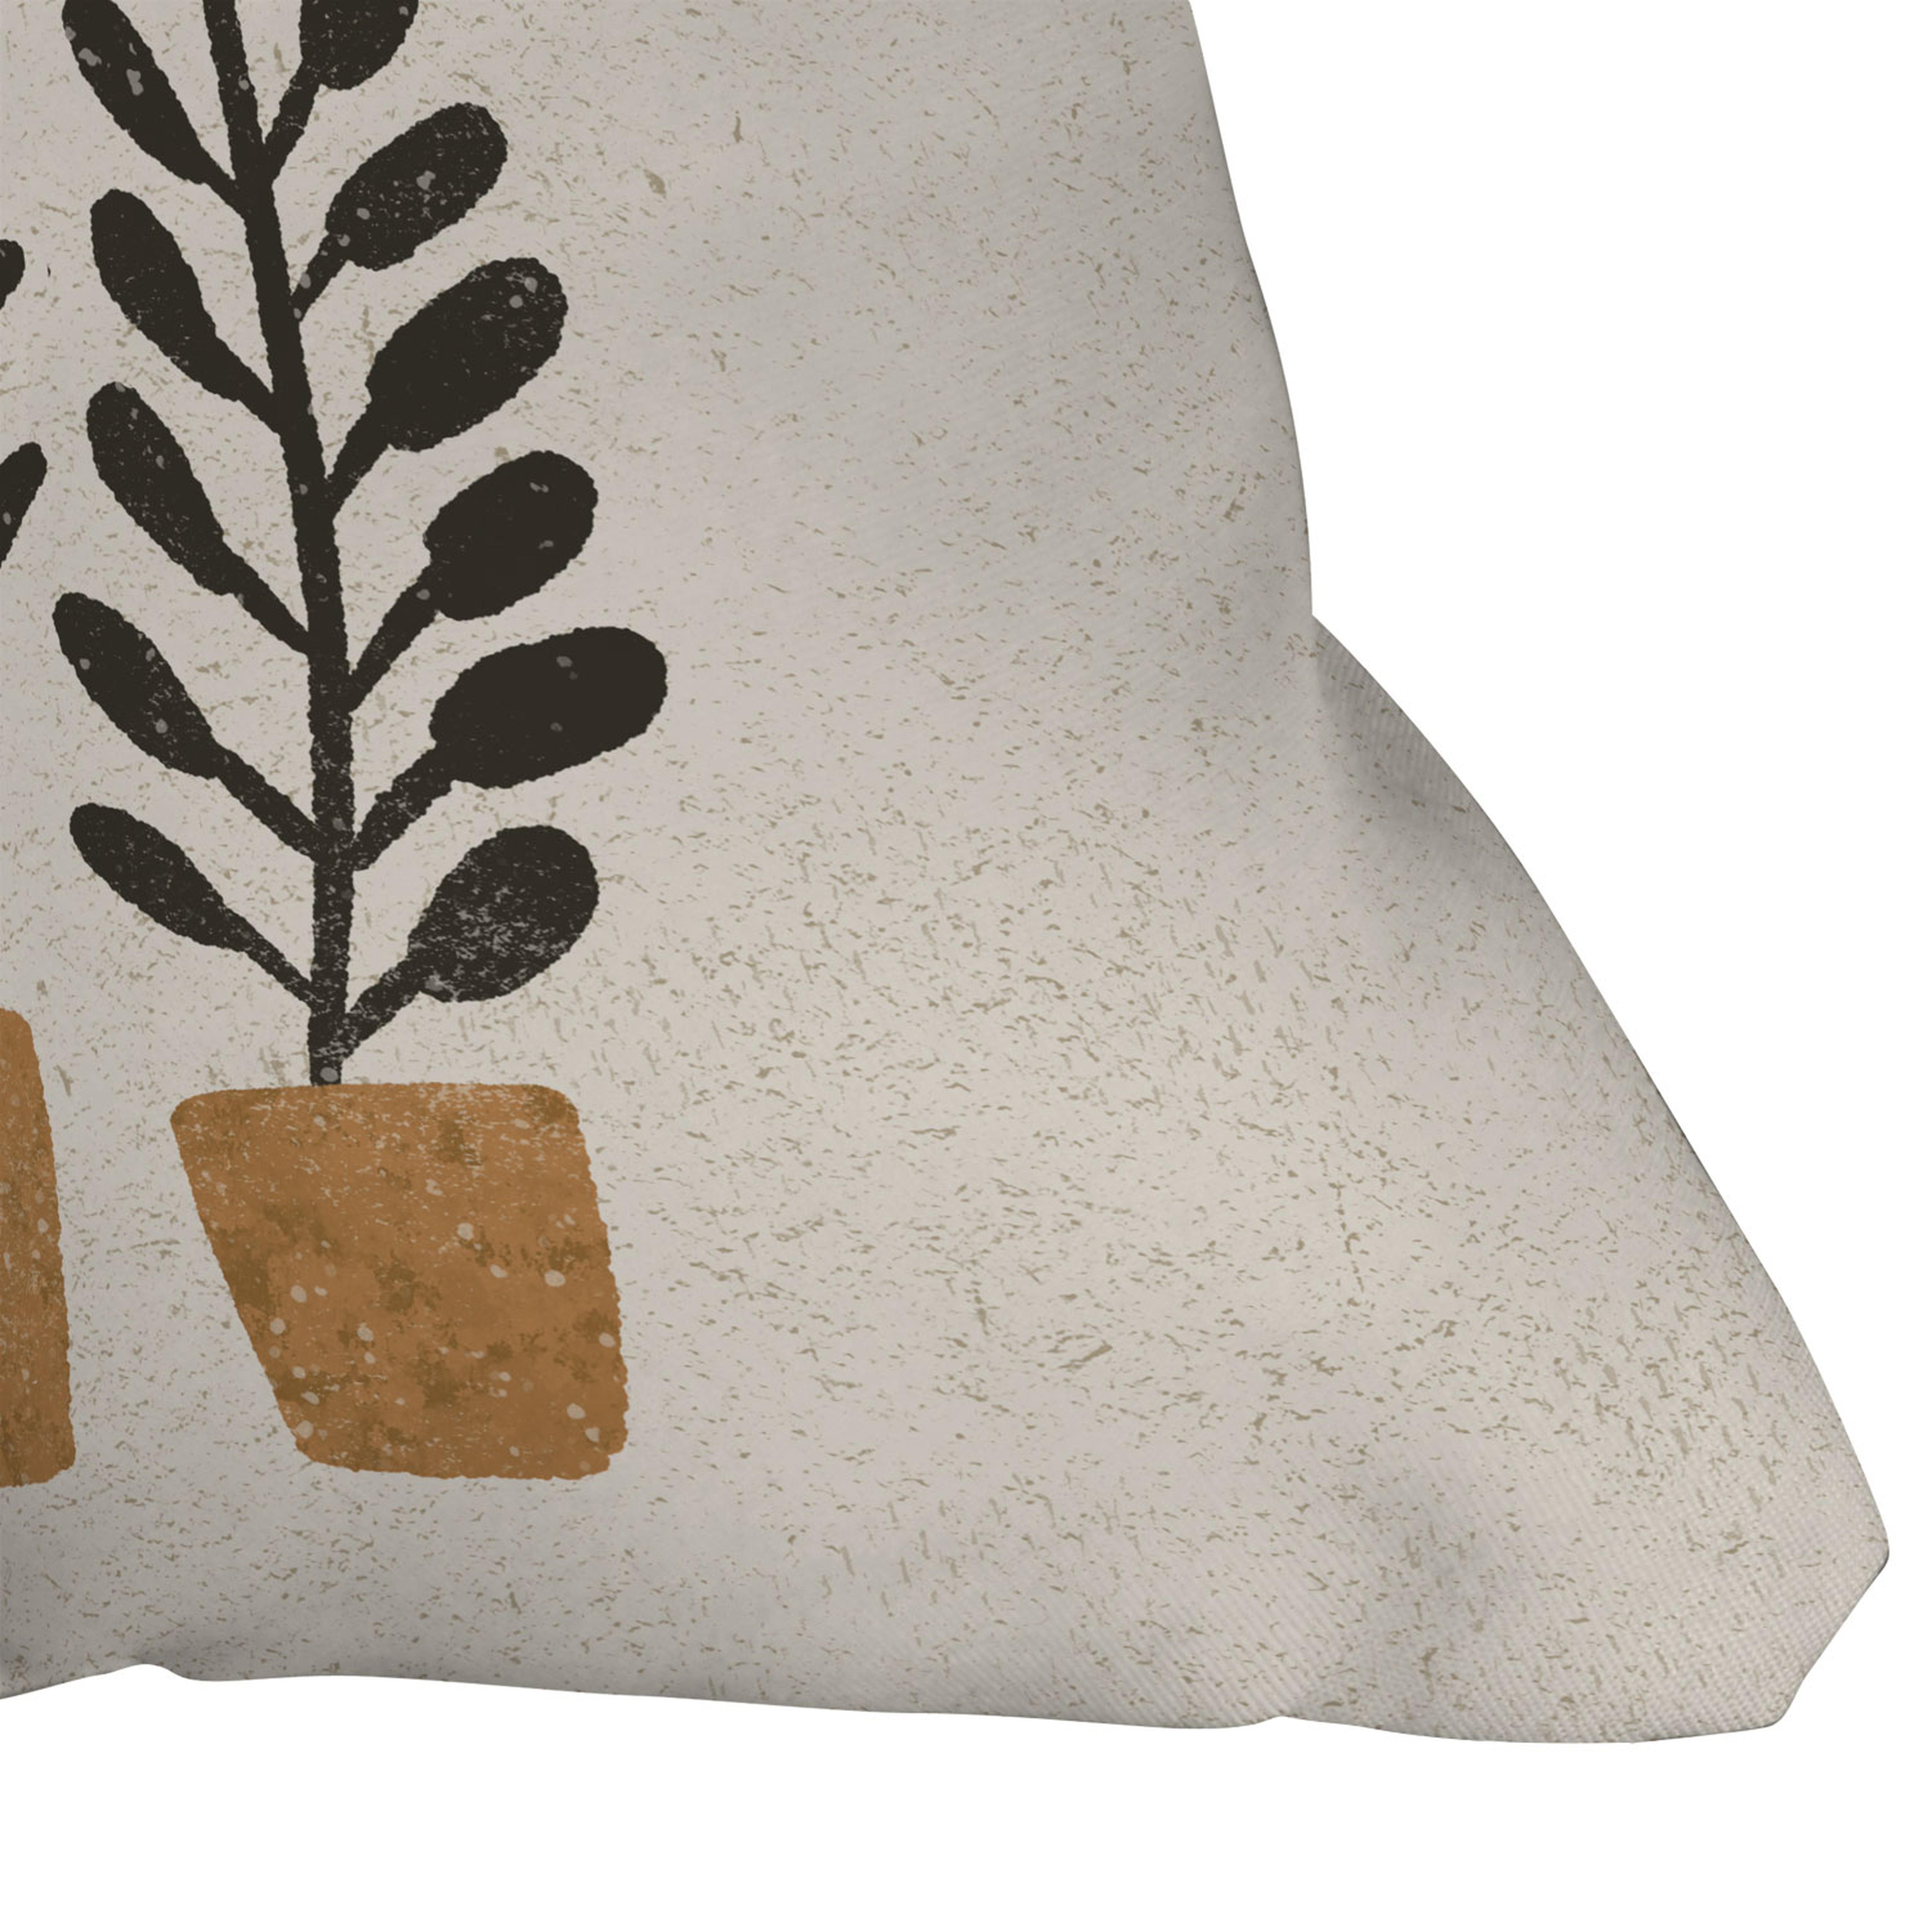 Potted Ferns Black Terracotta by Pauline Stanley - Outdoor Throw Pillow 18" x 18" - Wander Print Co.